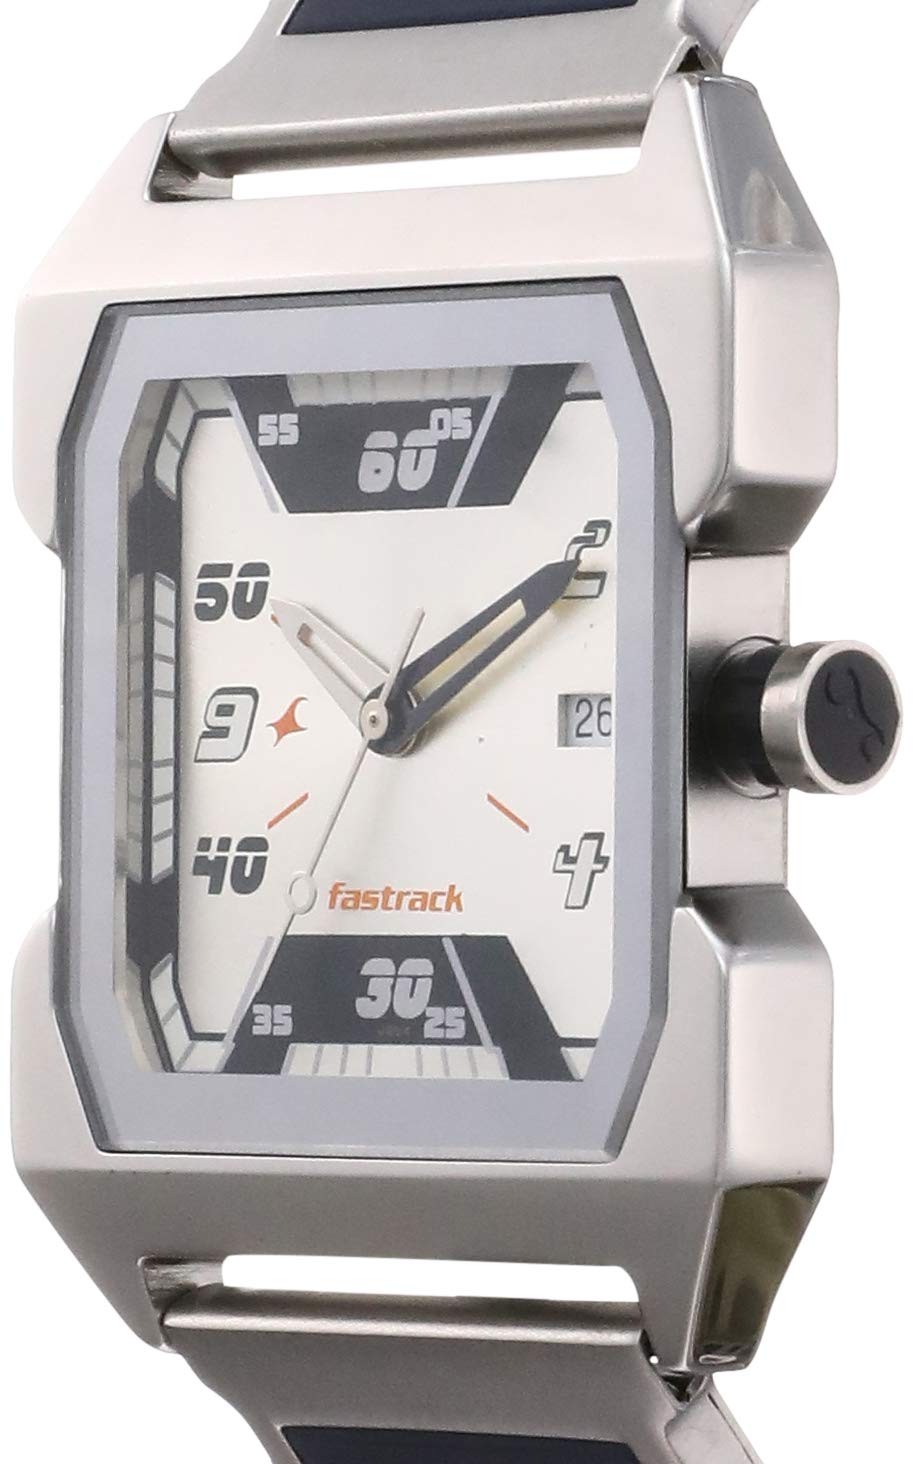 Fastrack Party Analog Silver Dial and Band Men's Stainless Steel Watch-NL1474SM01/NP1474SM01